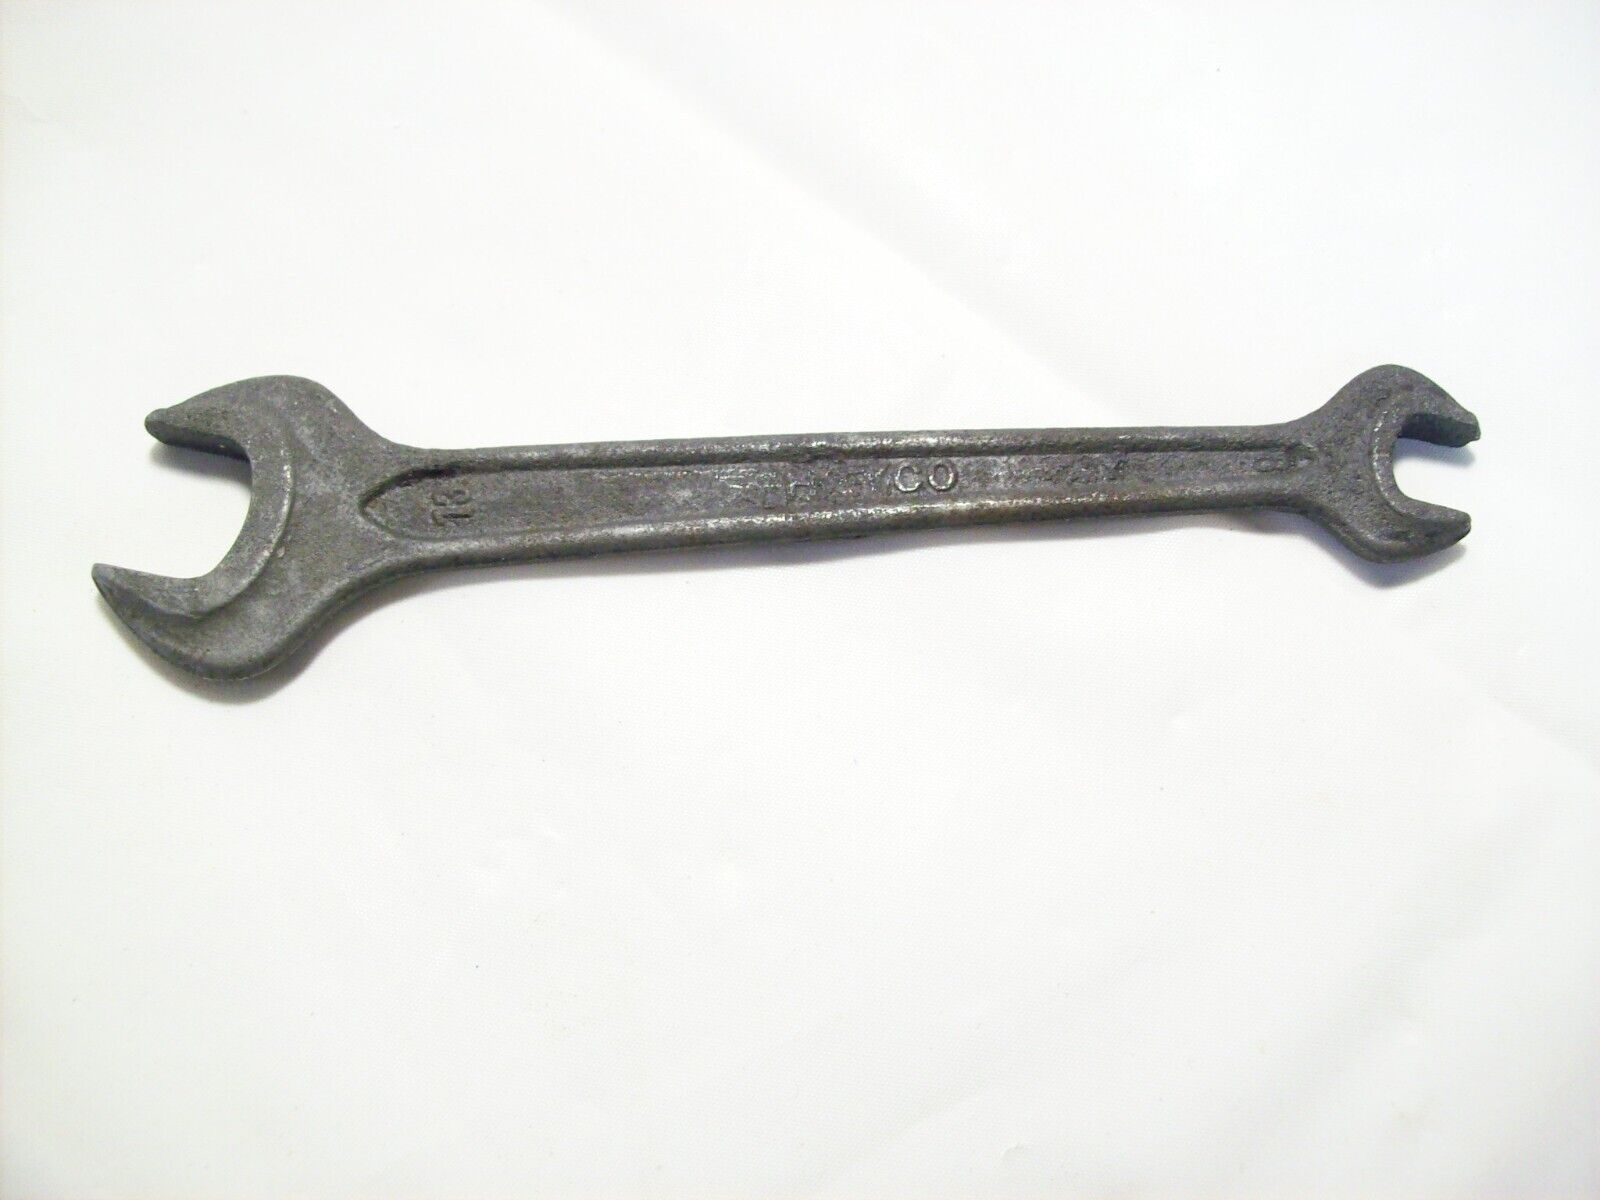 Heyco DIN 895 8mm X 13mm Open End Wrench West Germany Vintage